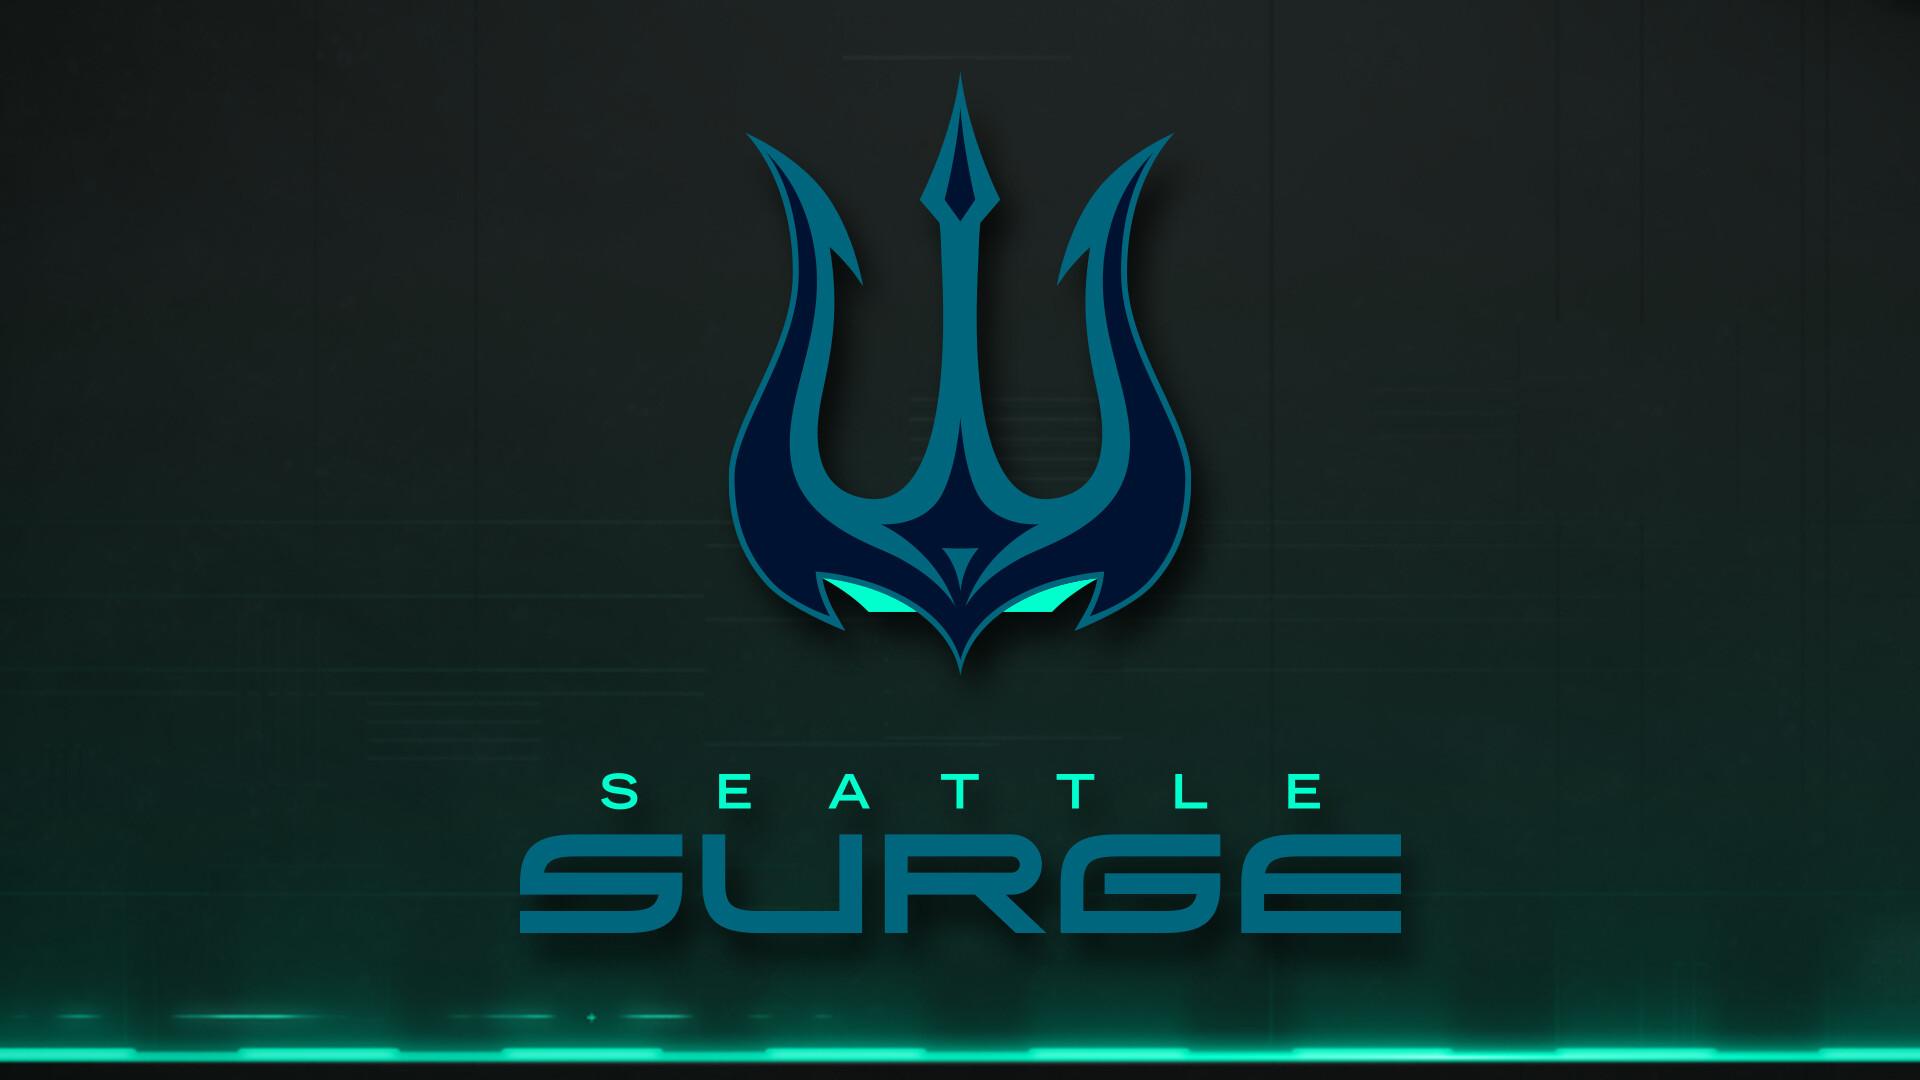 Call of Duty League™ - Seattle Surge Pack 2023